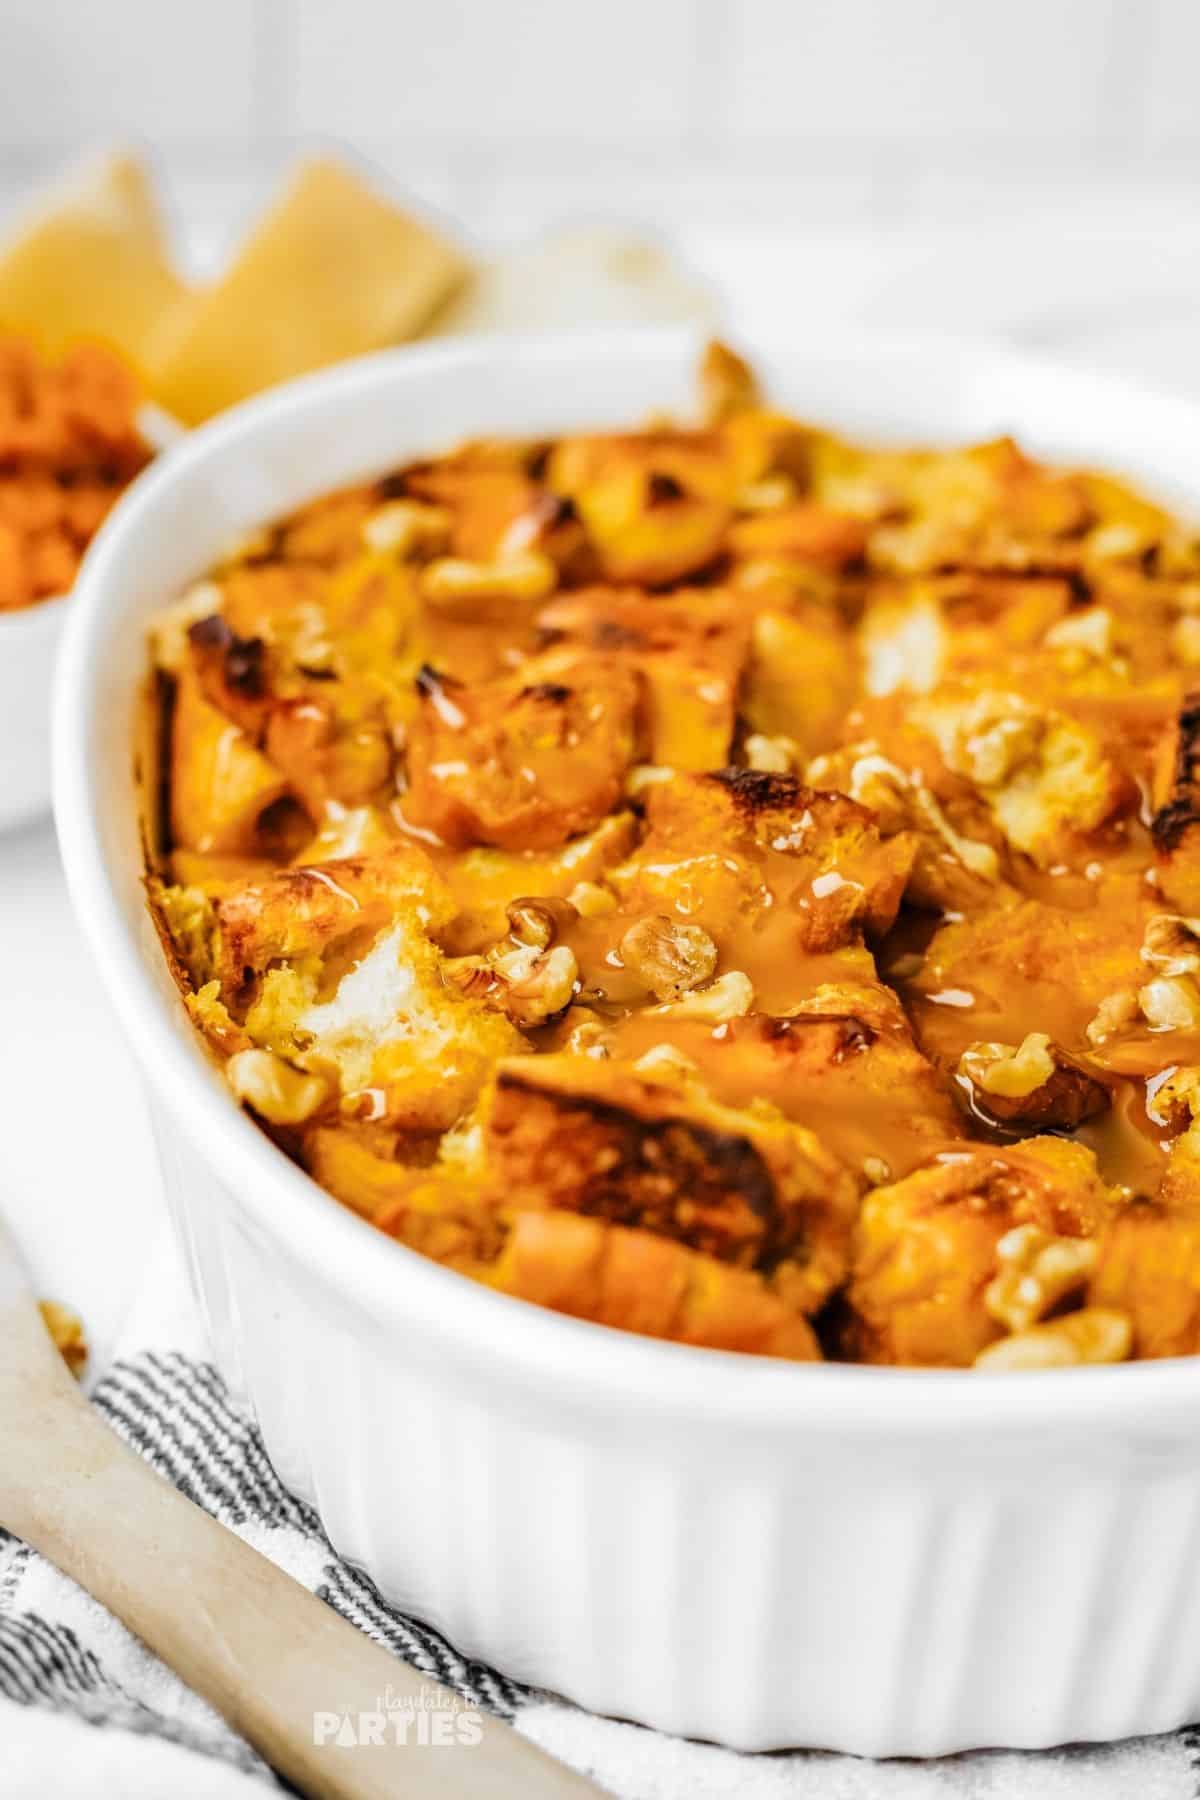 Nuts and glistening sauce transform Thanksgiving bread pudding into a delicious dessert.